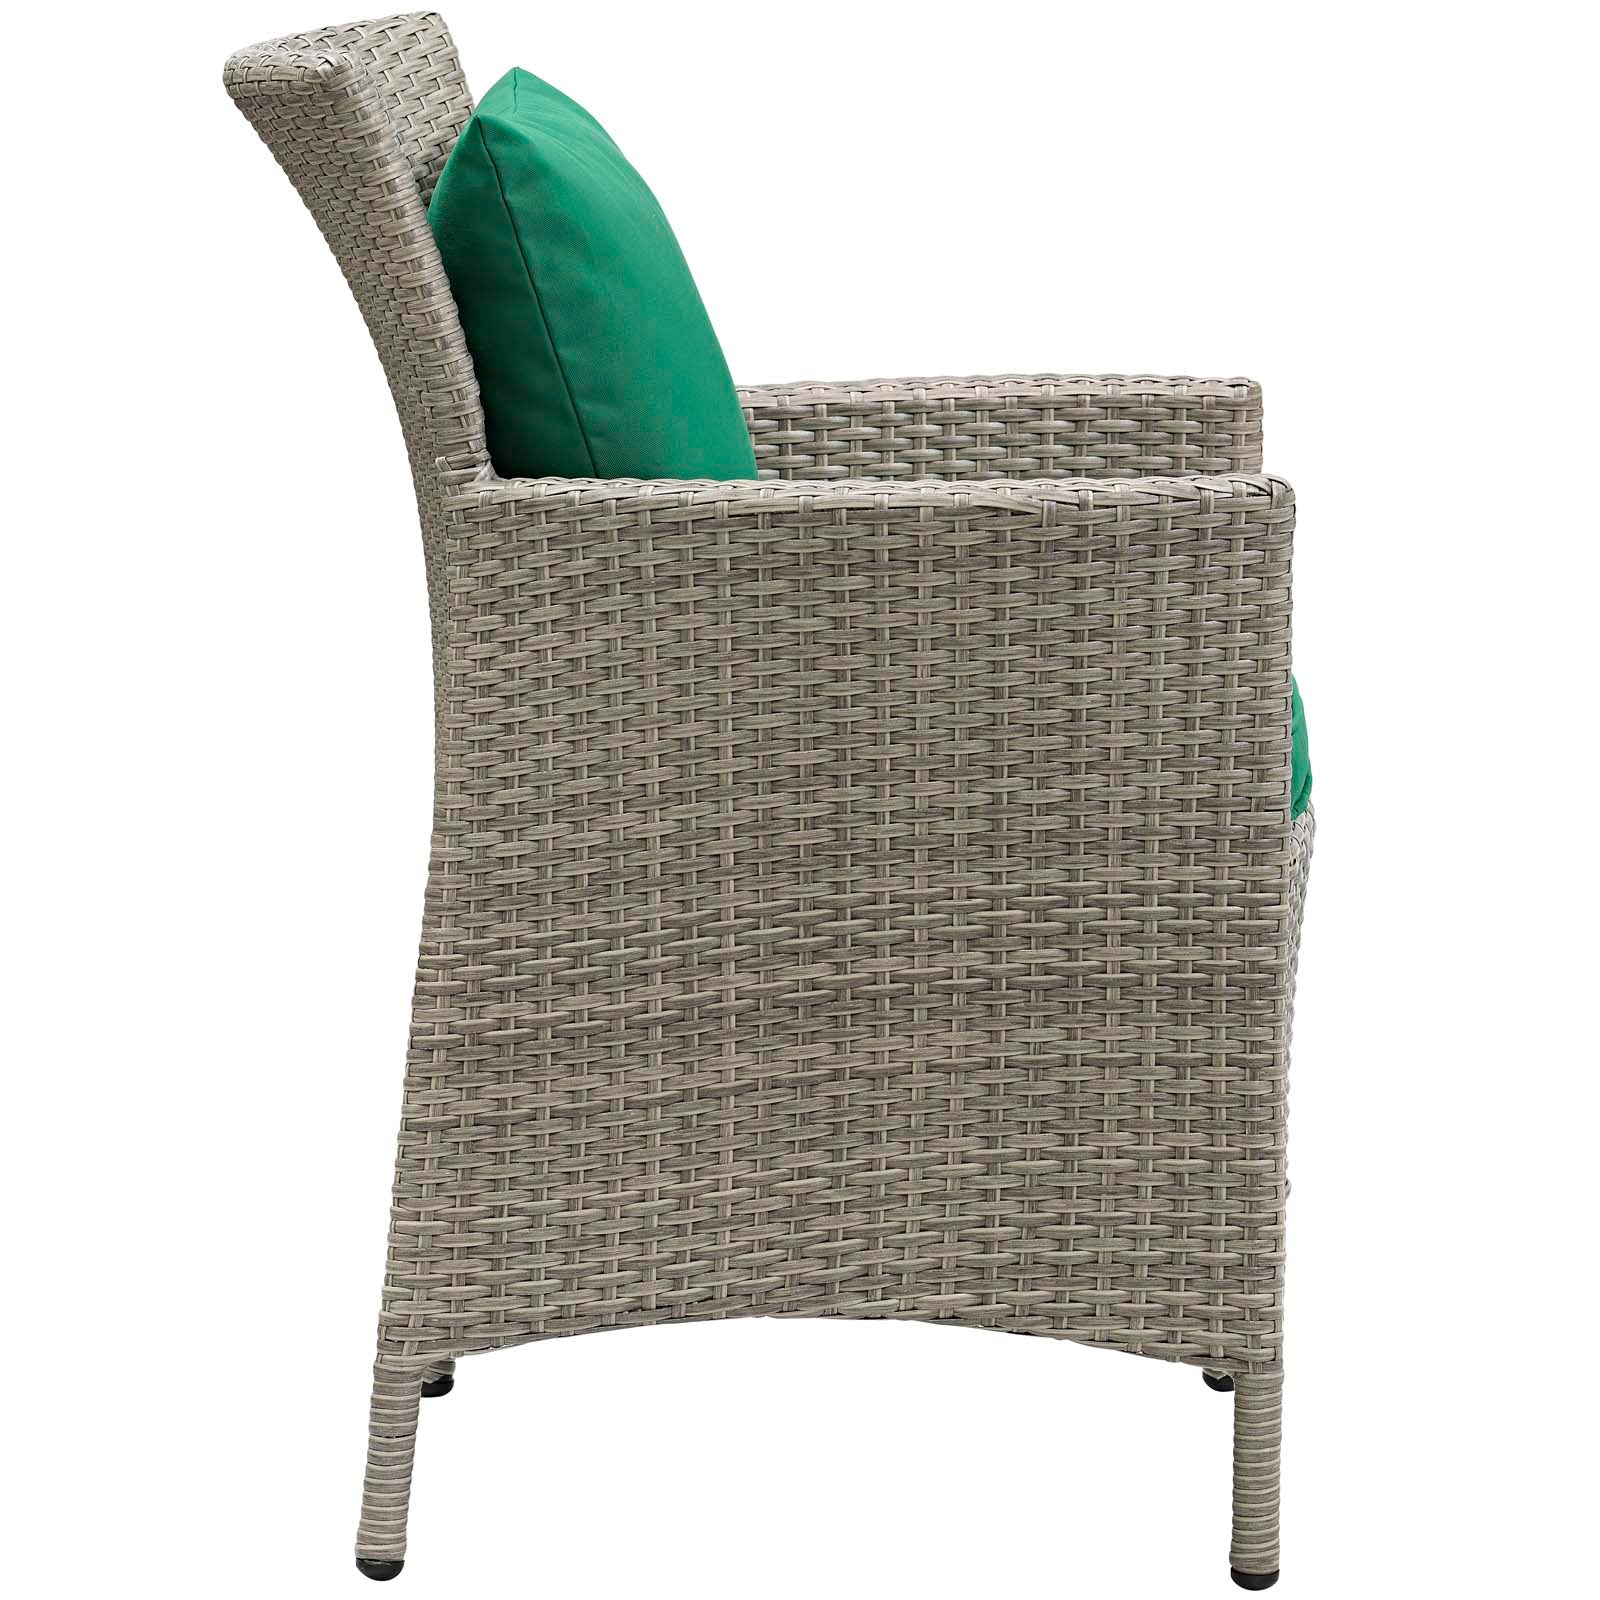 Modway Outdoor Dining Chairs - Conduit Outdoor Patio Wicker Rattan Dining Armchair Light Gray Green